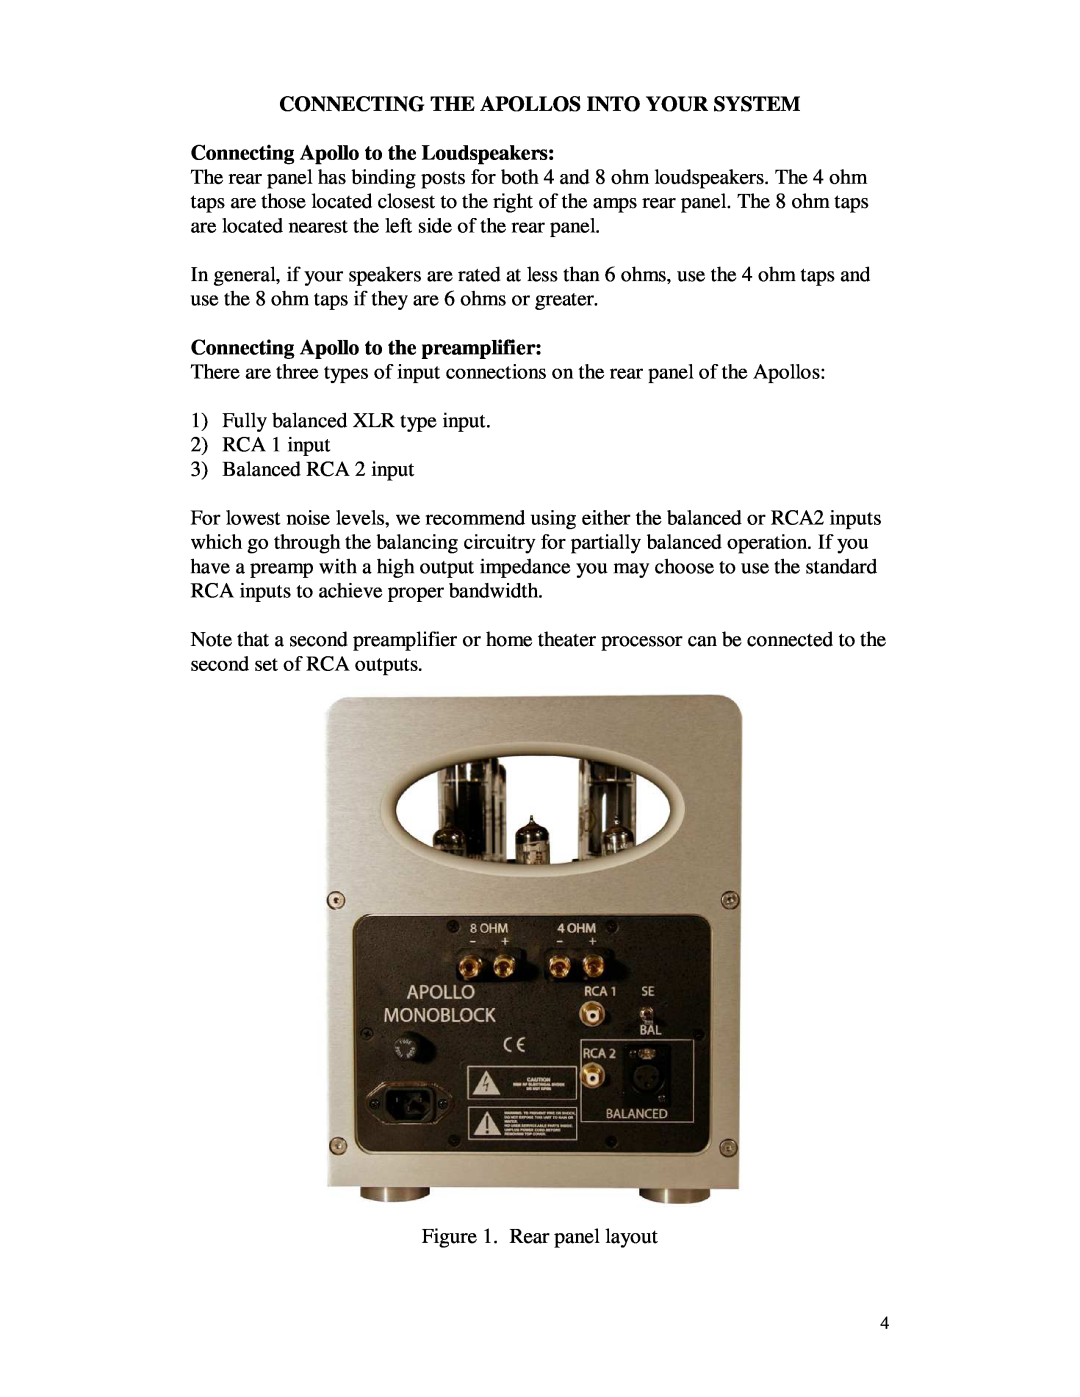 Apollo 645-062 owner manual Connecting The Apollos Into Your System, Connecting Apollo to the Loudspeakers 